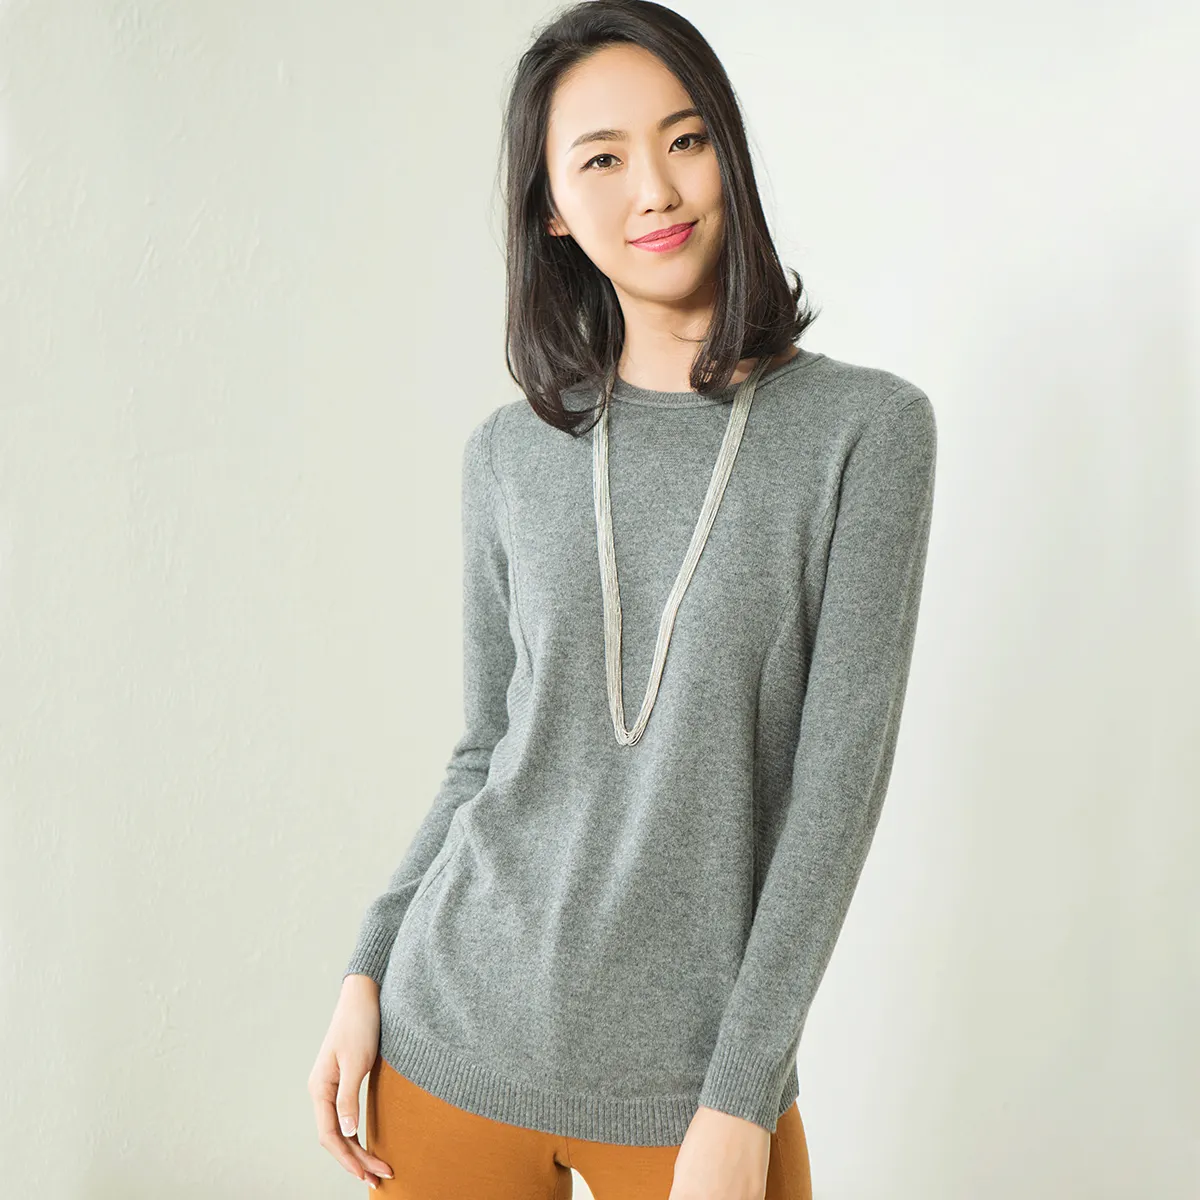 Winter warm fashion knitted cashmere pullover crew neck women sweater